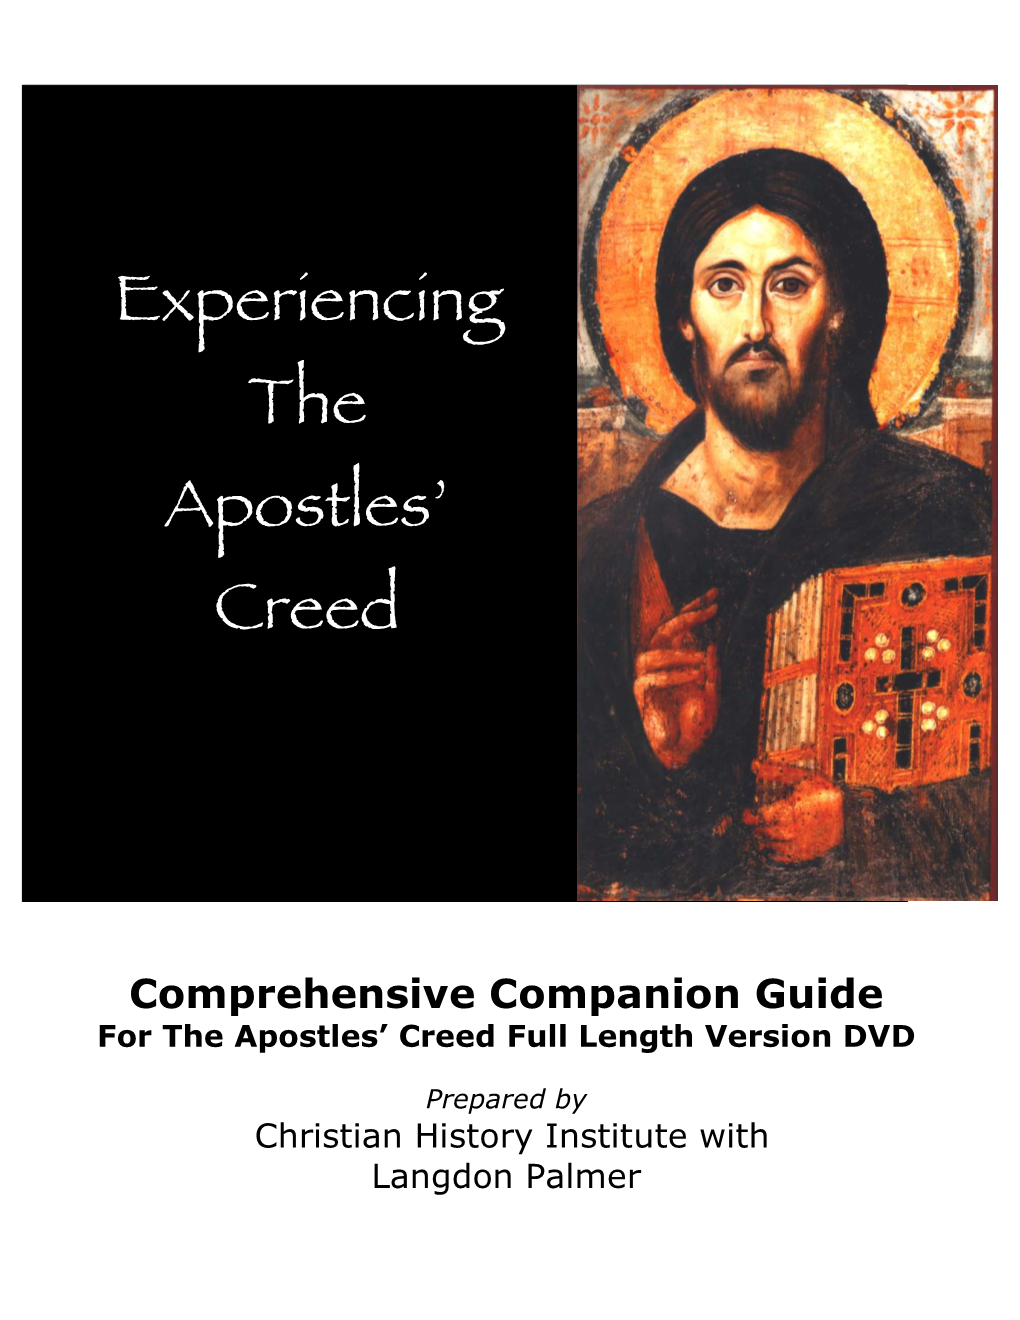 Experiencing the Apostles' Creed